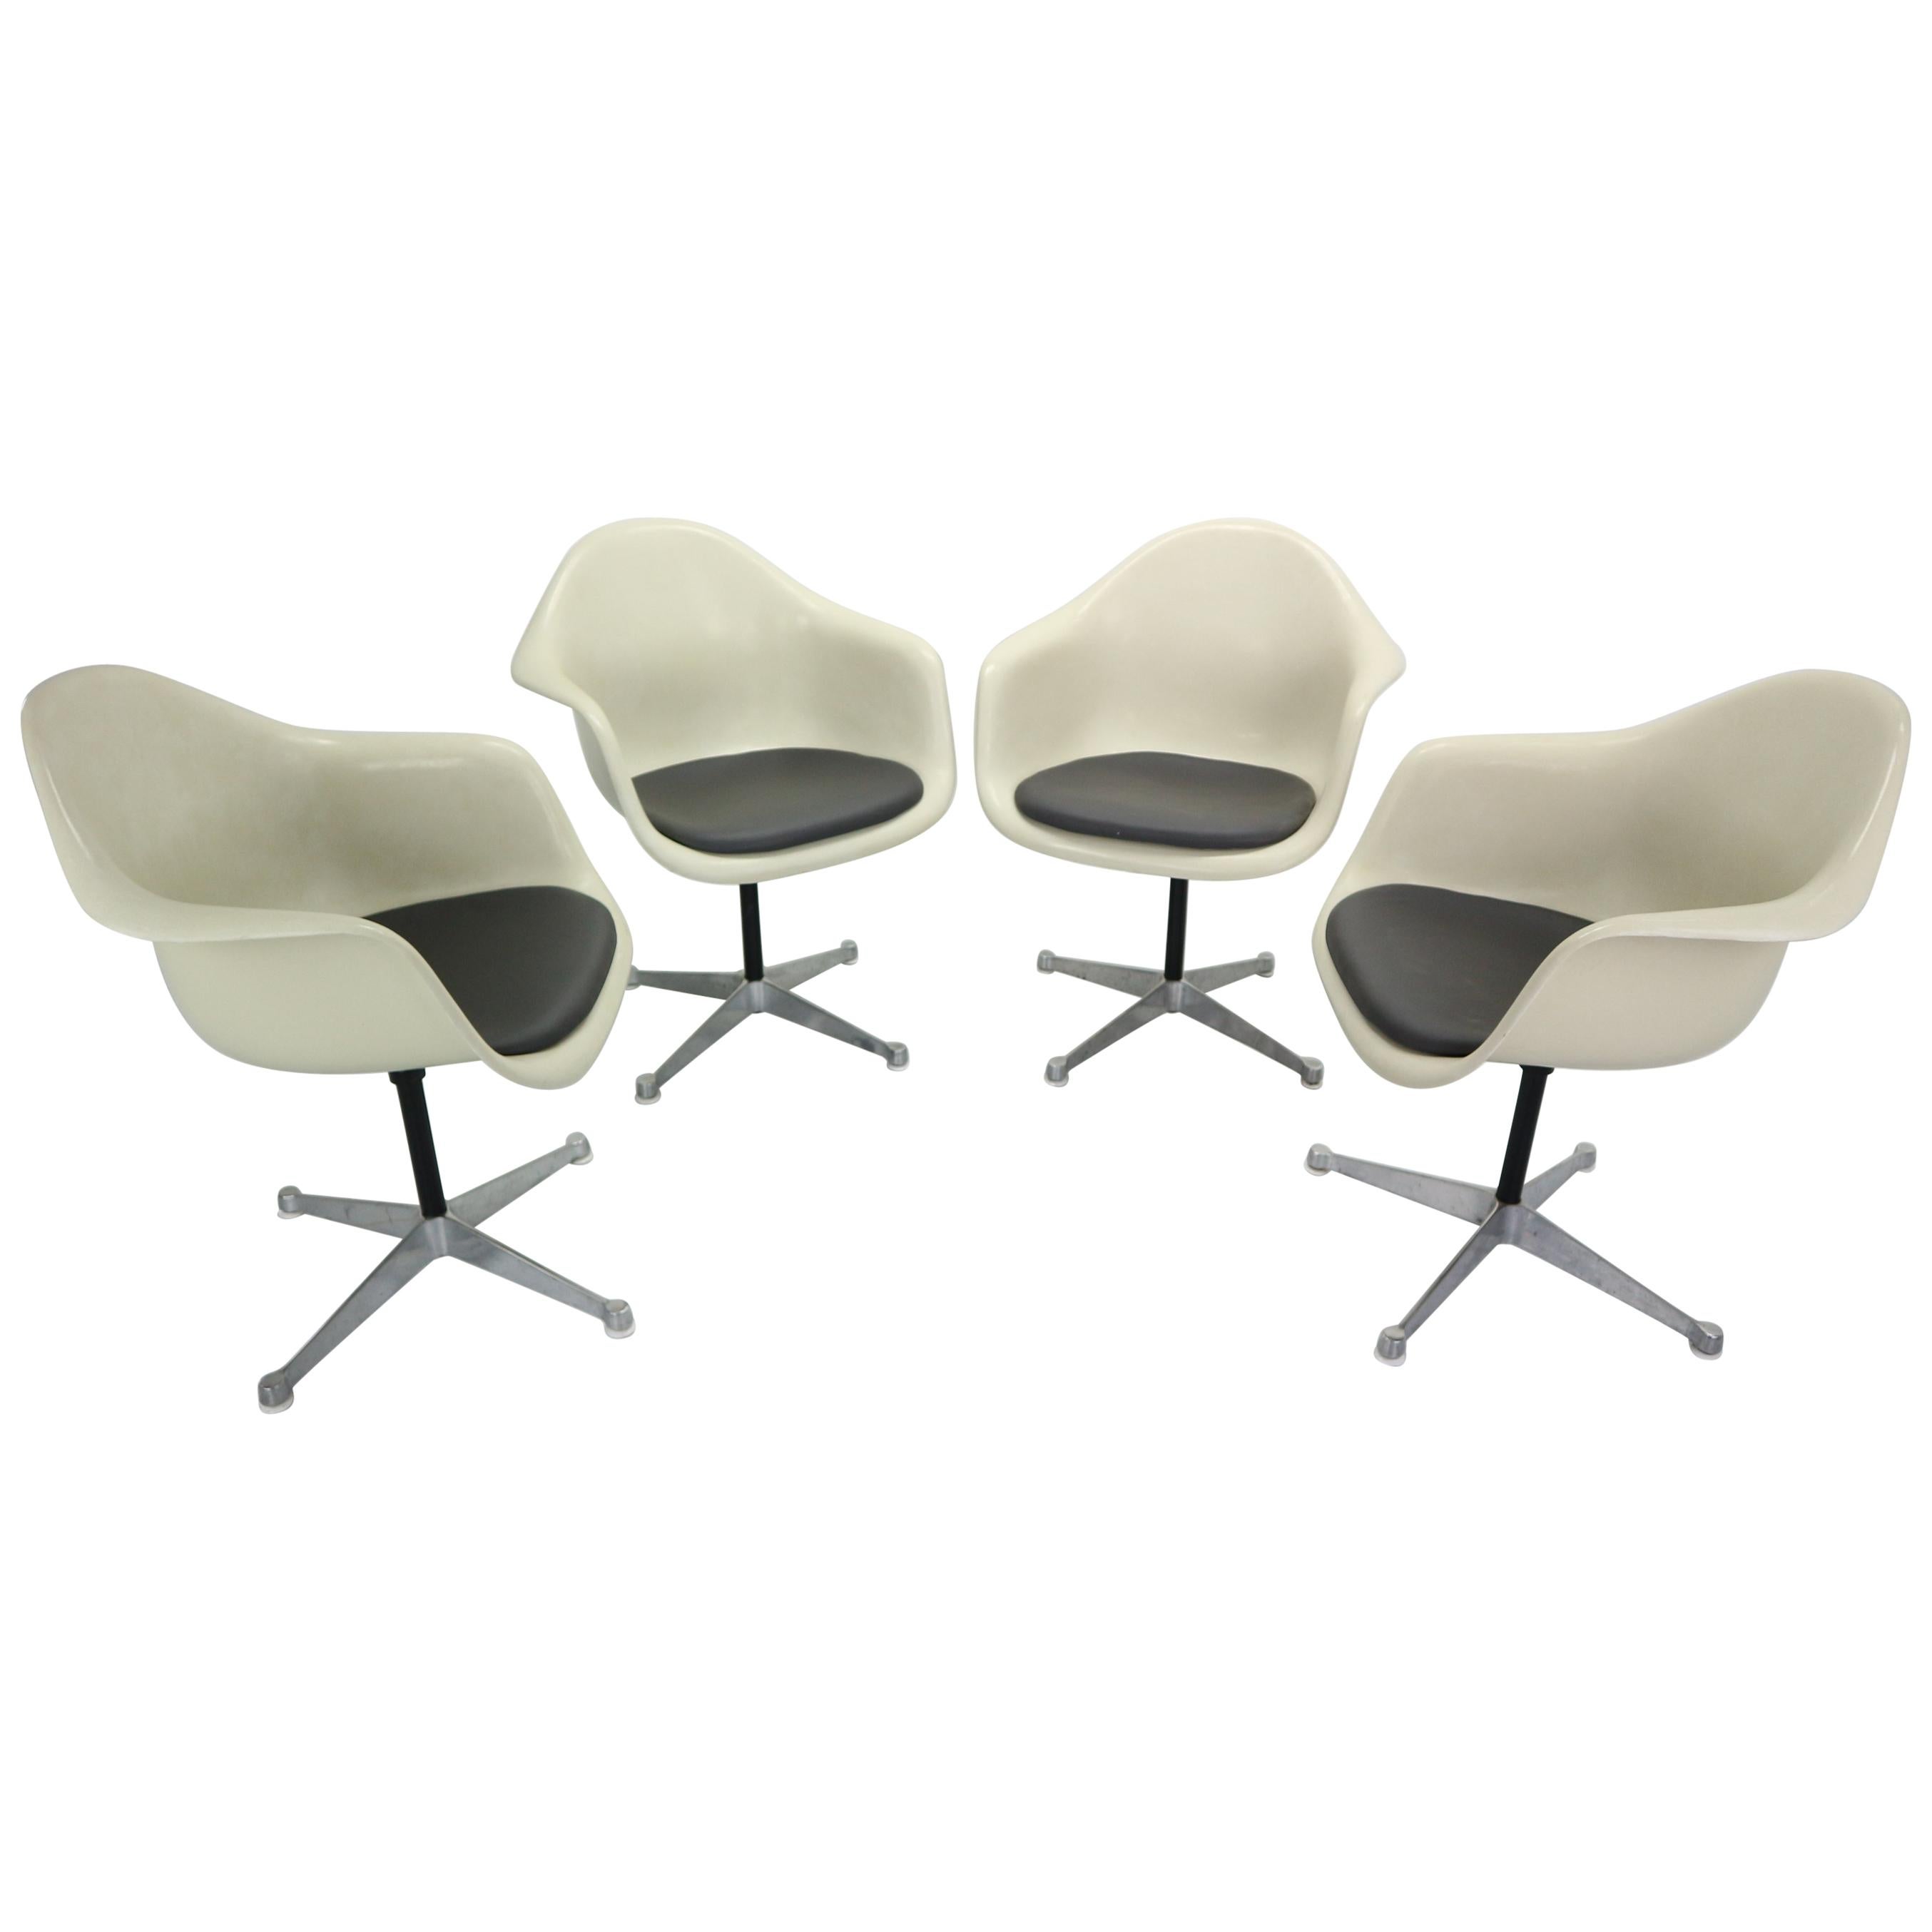 Set of 4 Charles Eames for Herman Miller Bucket Swivel Chairs, 1950s